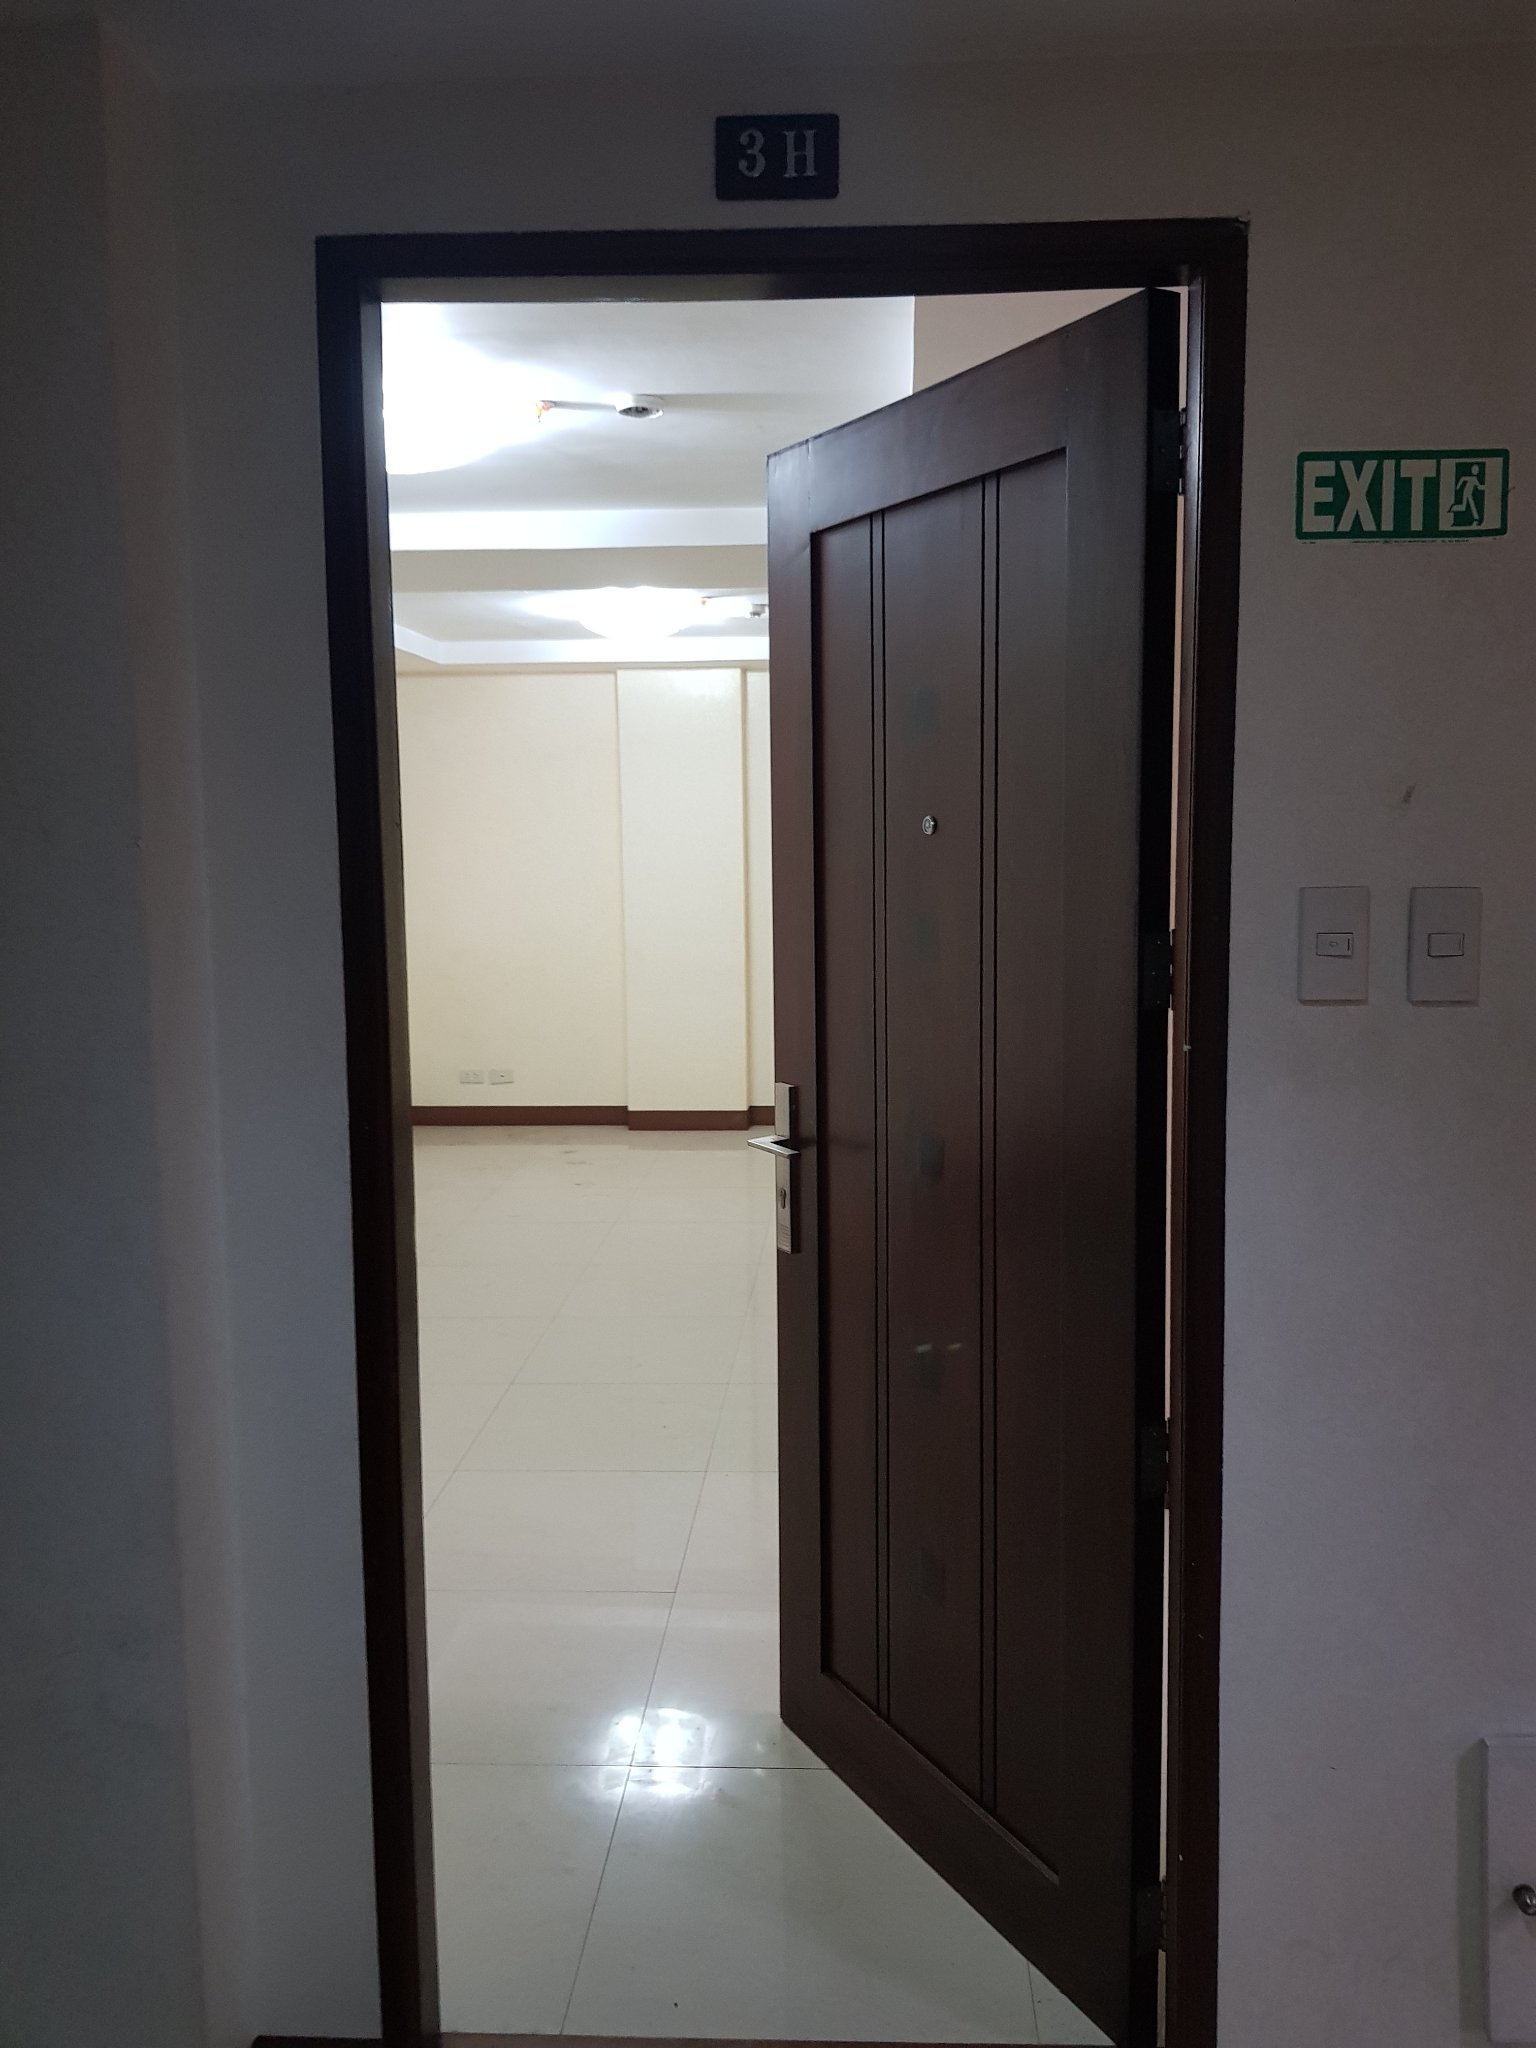 Apartment for rent at Pasig near BGC, Market2 and Pateros